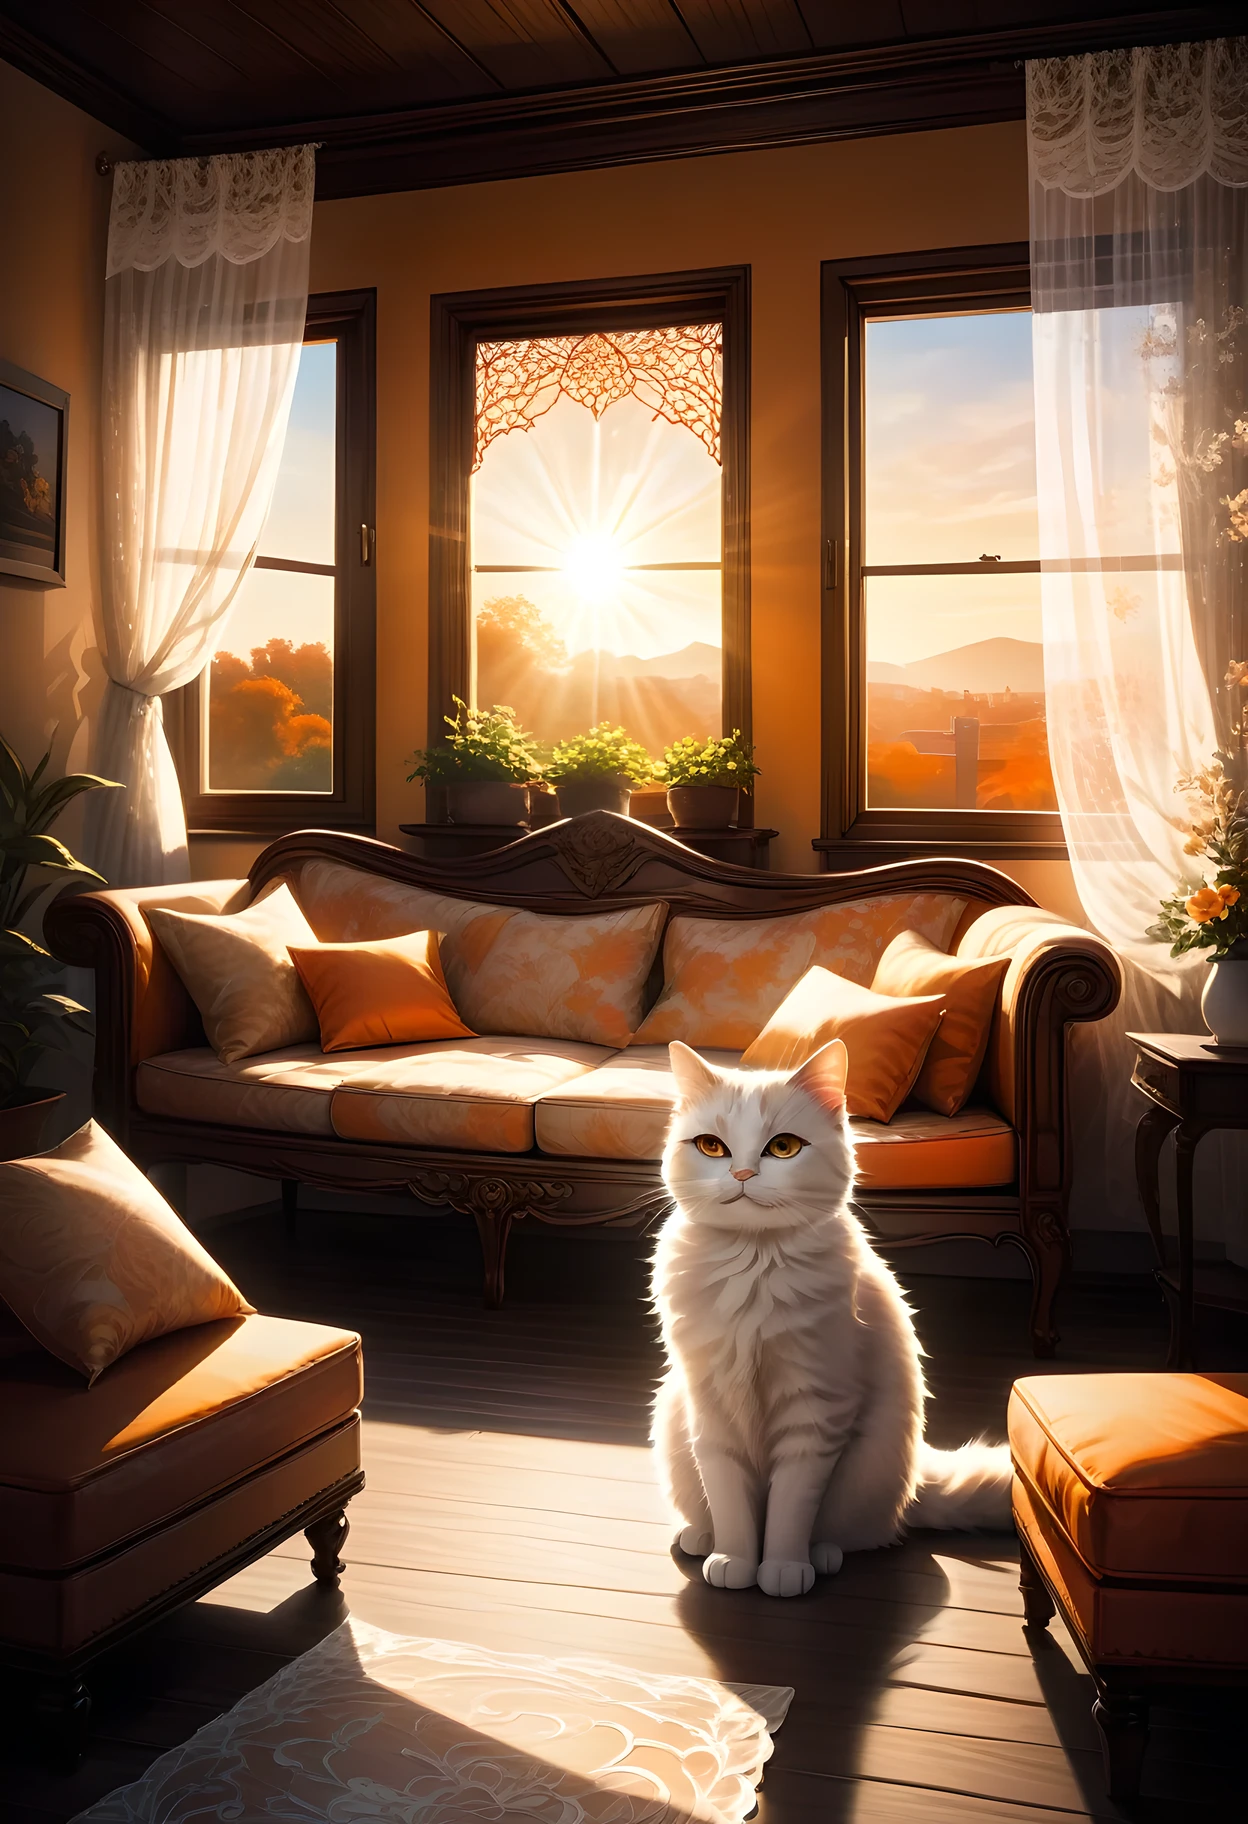 Wooden-framed, open, double-glazed window, white intricate patterned lace curtains fluttering in the wind, seen from the room:1.2, sunlight streaming in, illuminating the cat on the sofa, dusk, orange sky, graceful.